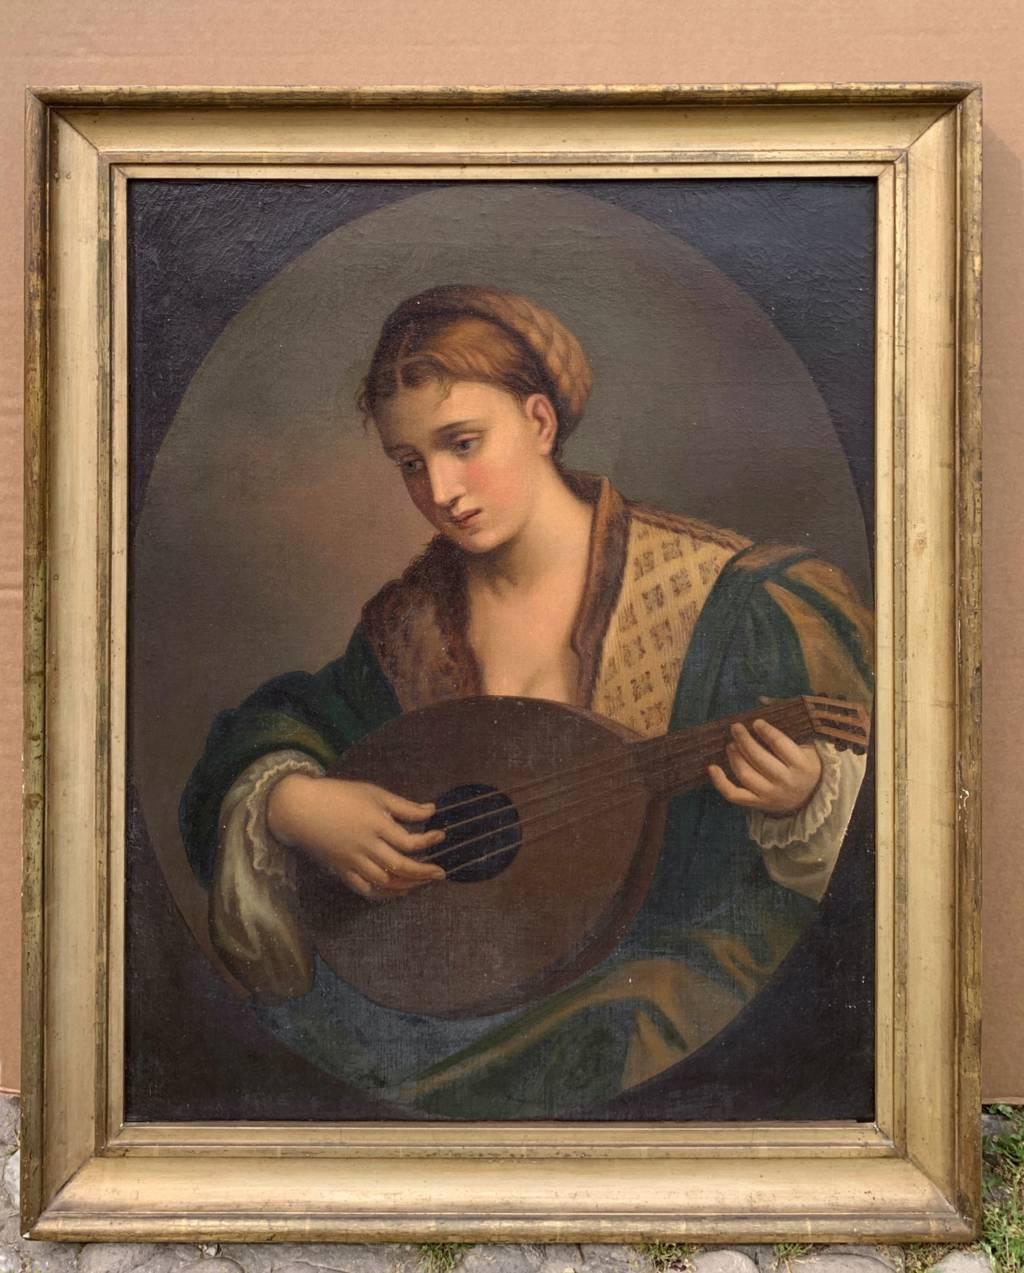 Romantic Italian painter - 19th century figure painting - Lutist - Oil on canvas - Painting by Unknown